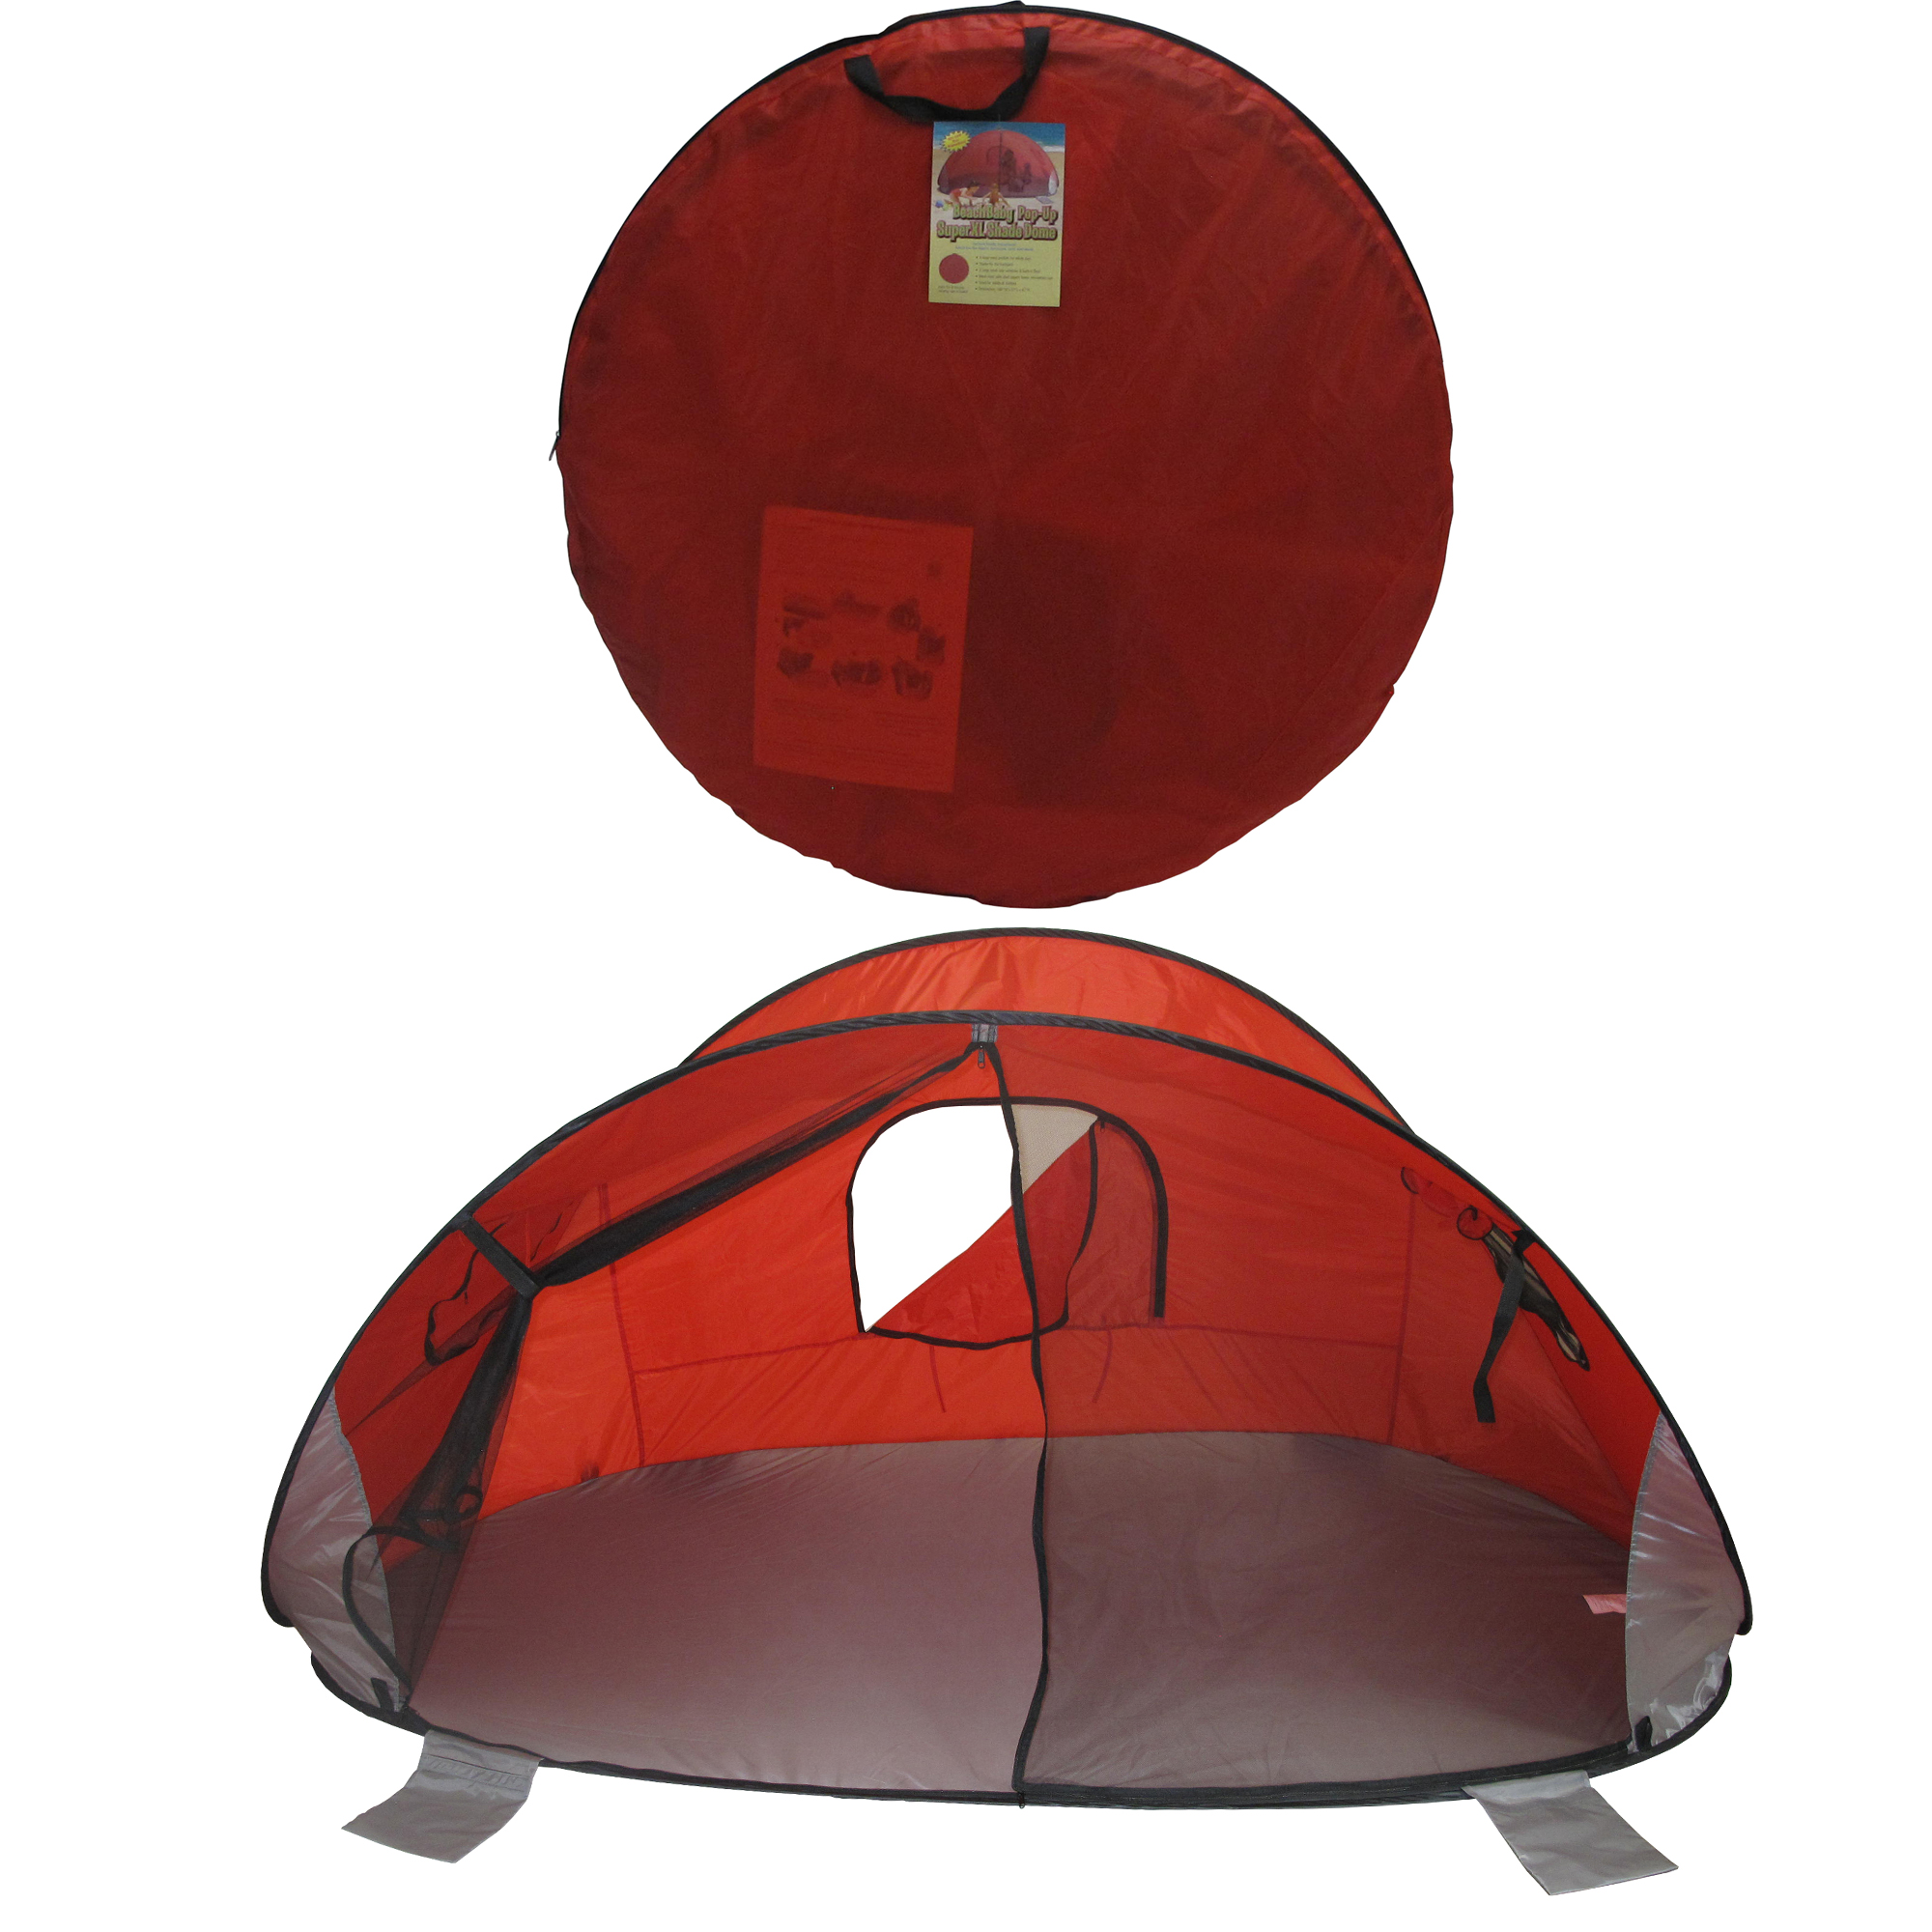 BEACH Baby Family Size Pop-Up Shade Dome